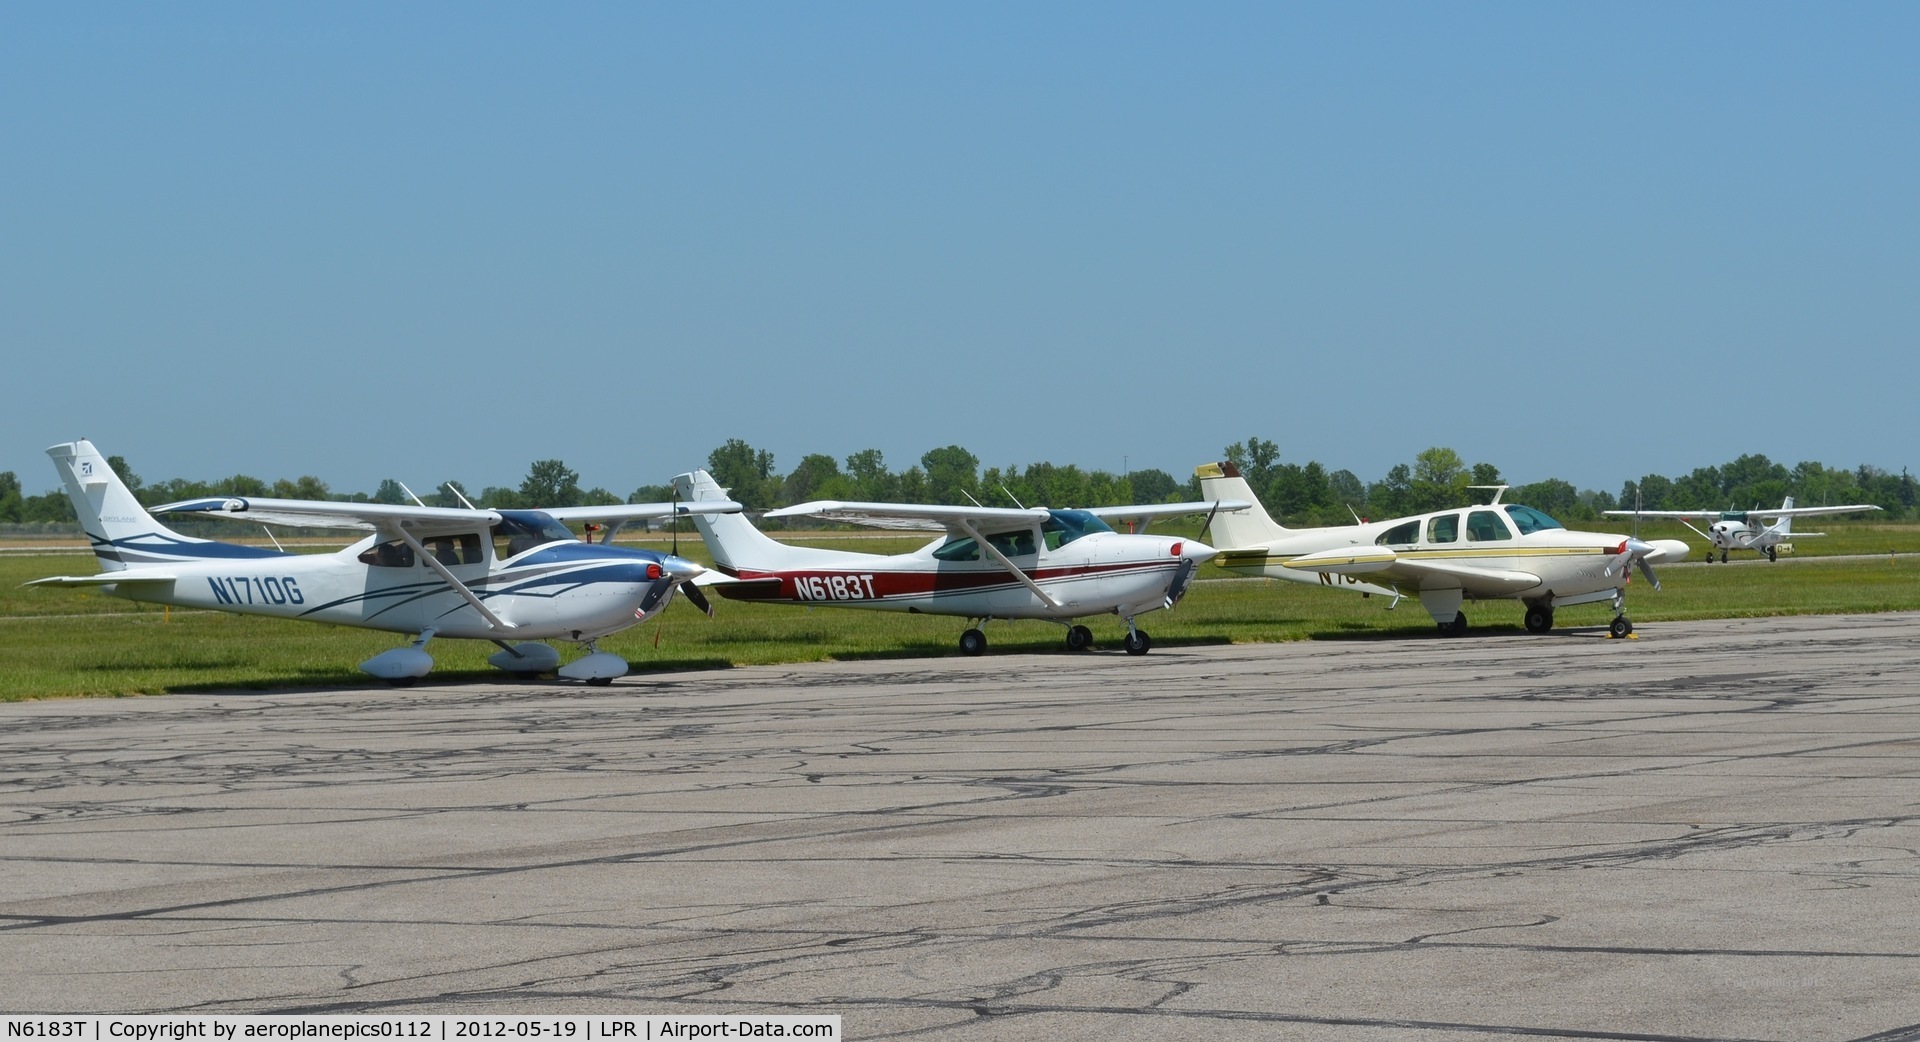 N6183T, Cessna R182 Skylane RG C/N R18201930, N1710G, N6183T and an unidentified aircraft are seen on the tarmac at Lorain County Regional Airport.